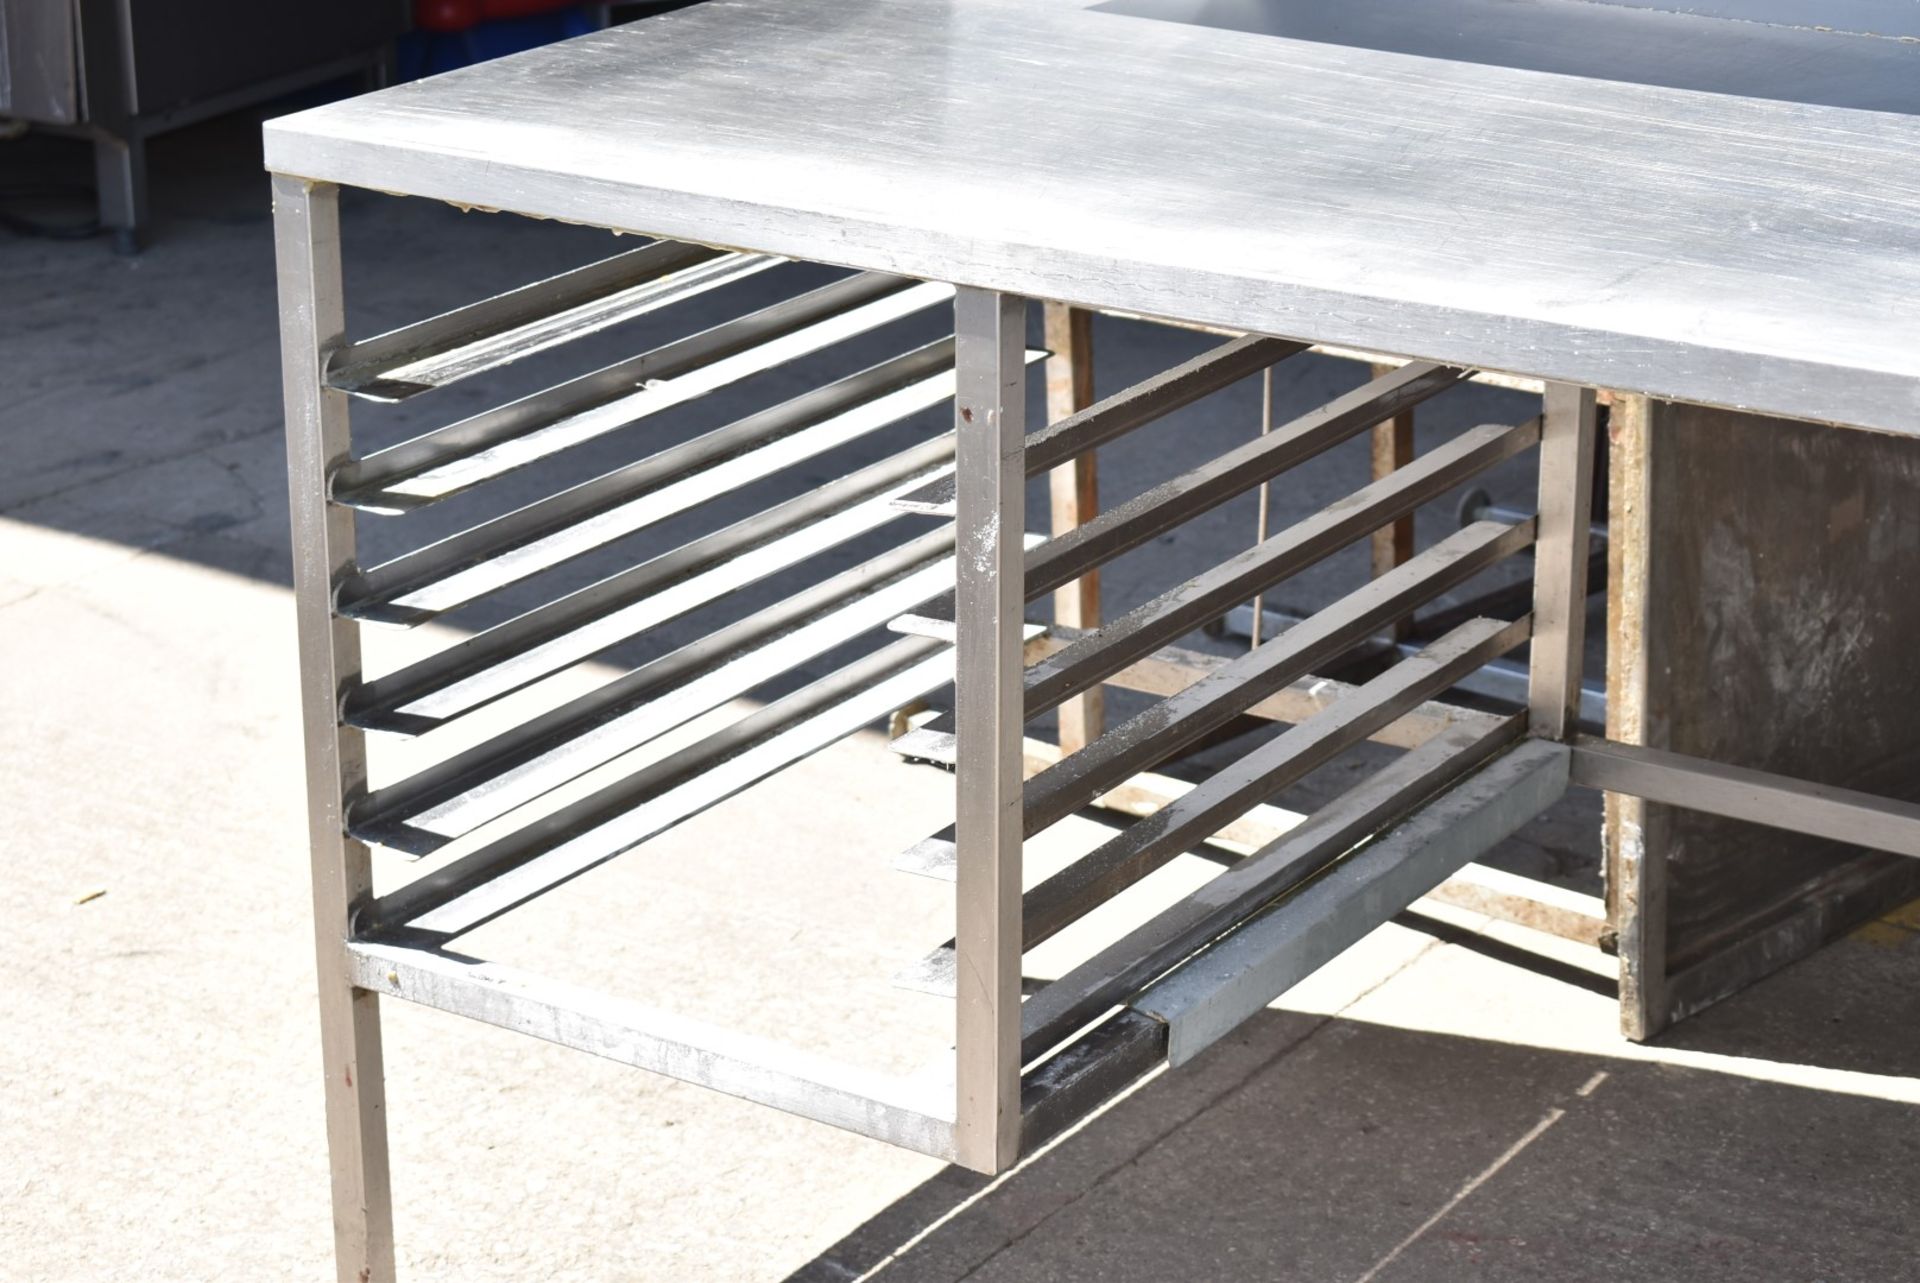 1 x Stainless Steel Prep Bench With Large Splashback Panel, Multiple Shelves and Tray Runners - Rece - Image 3 of 11